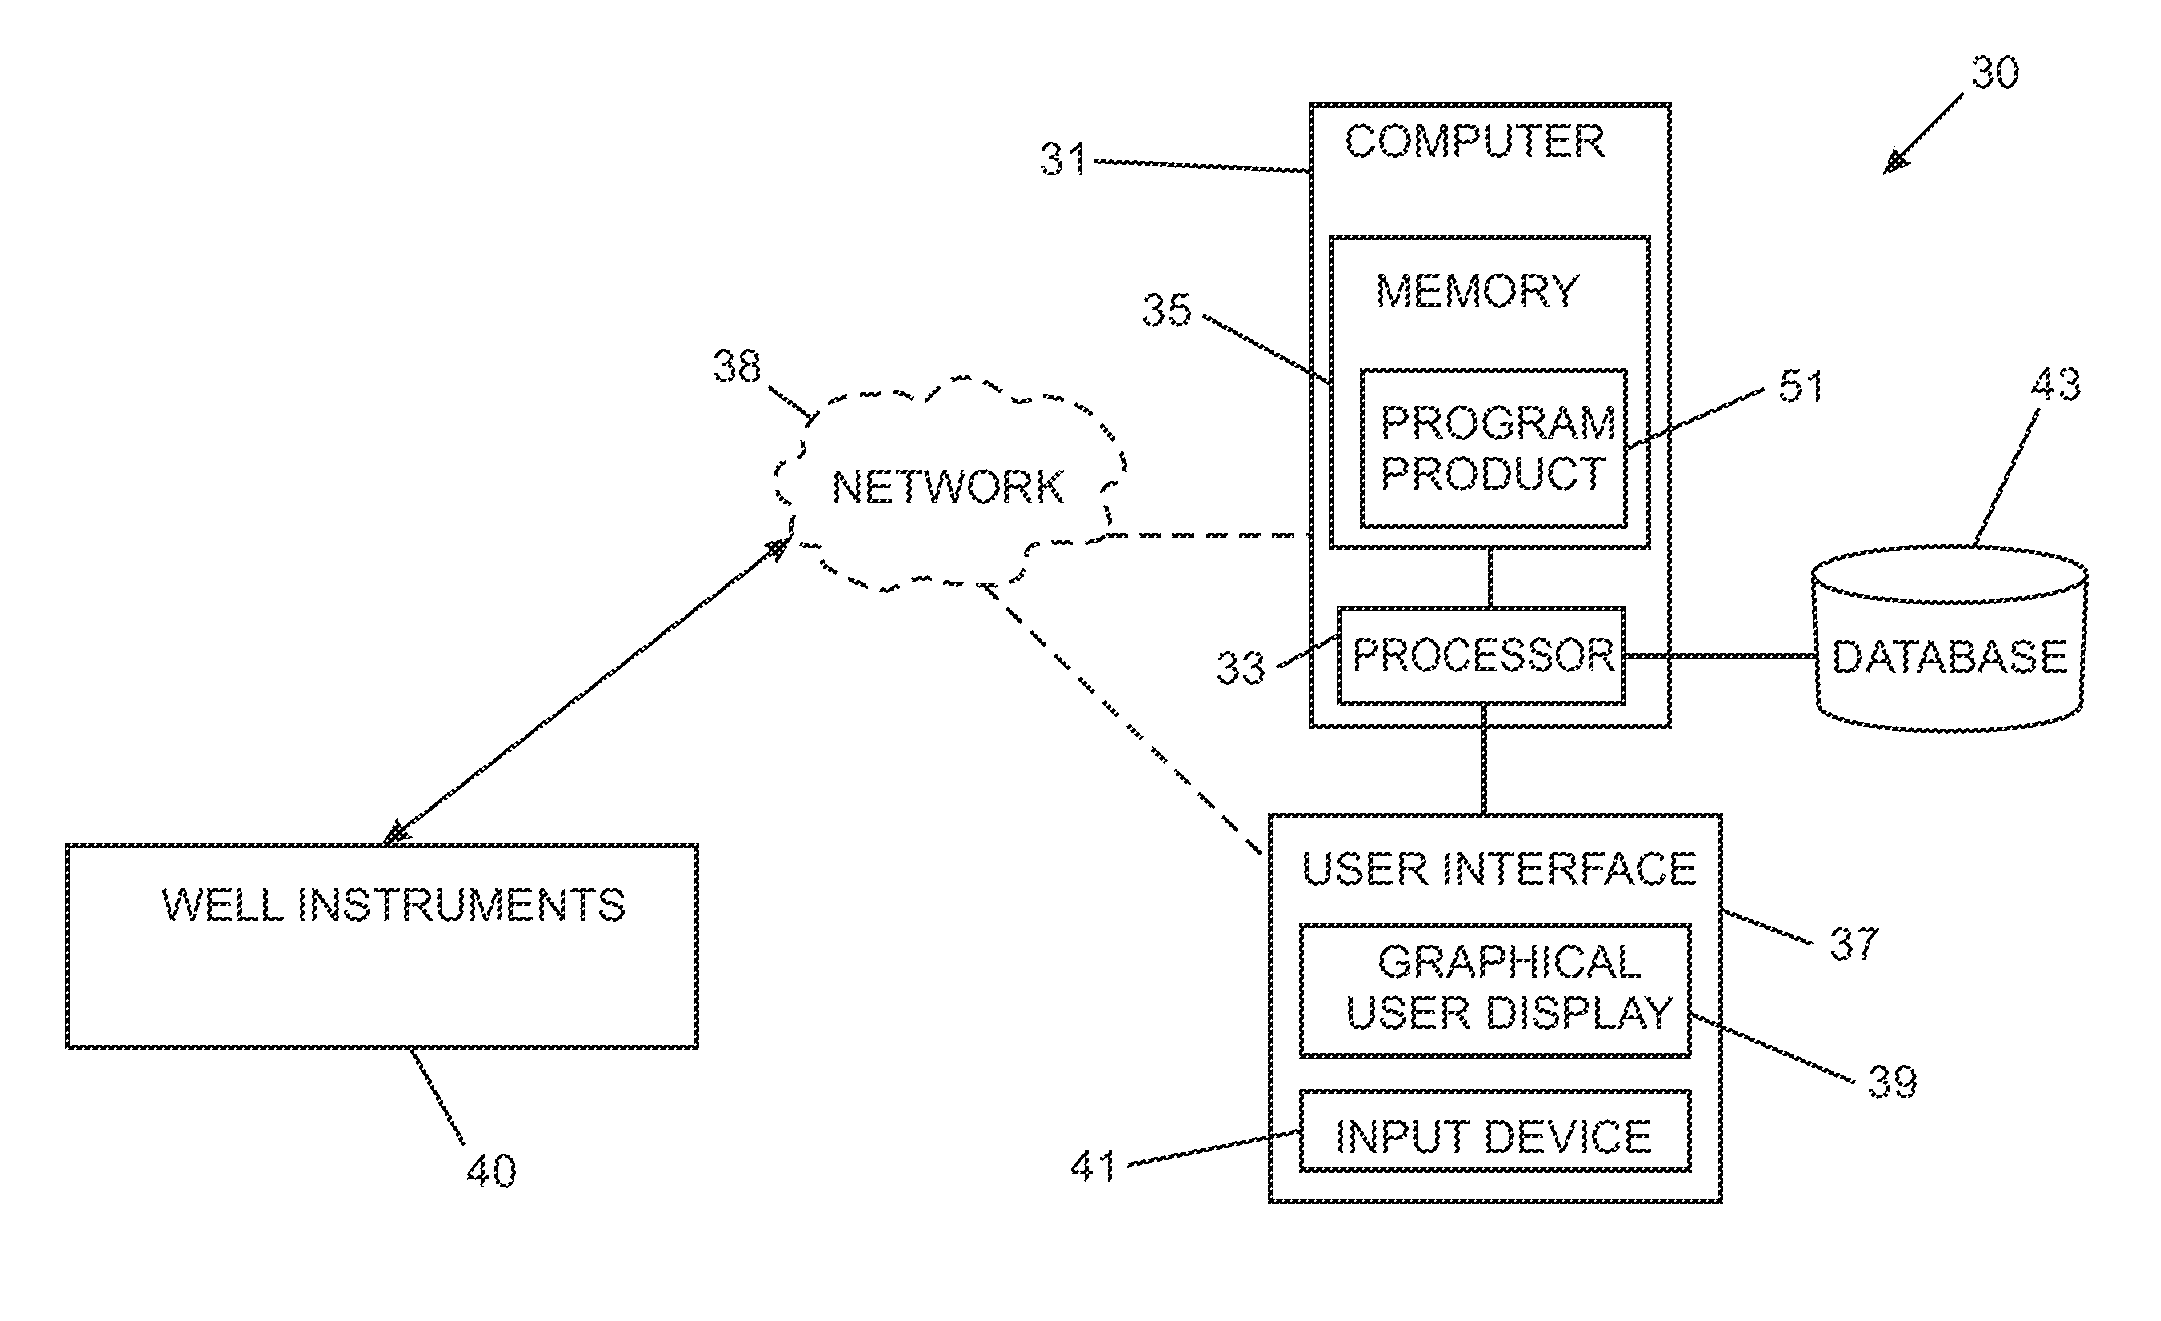 Real-time dynamic data validation apparatus and computer readable media for intelligent fields